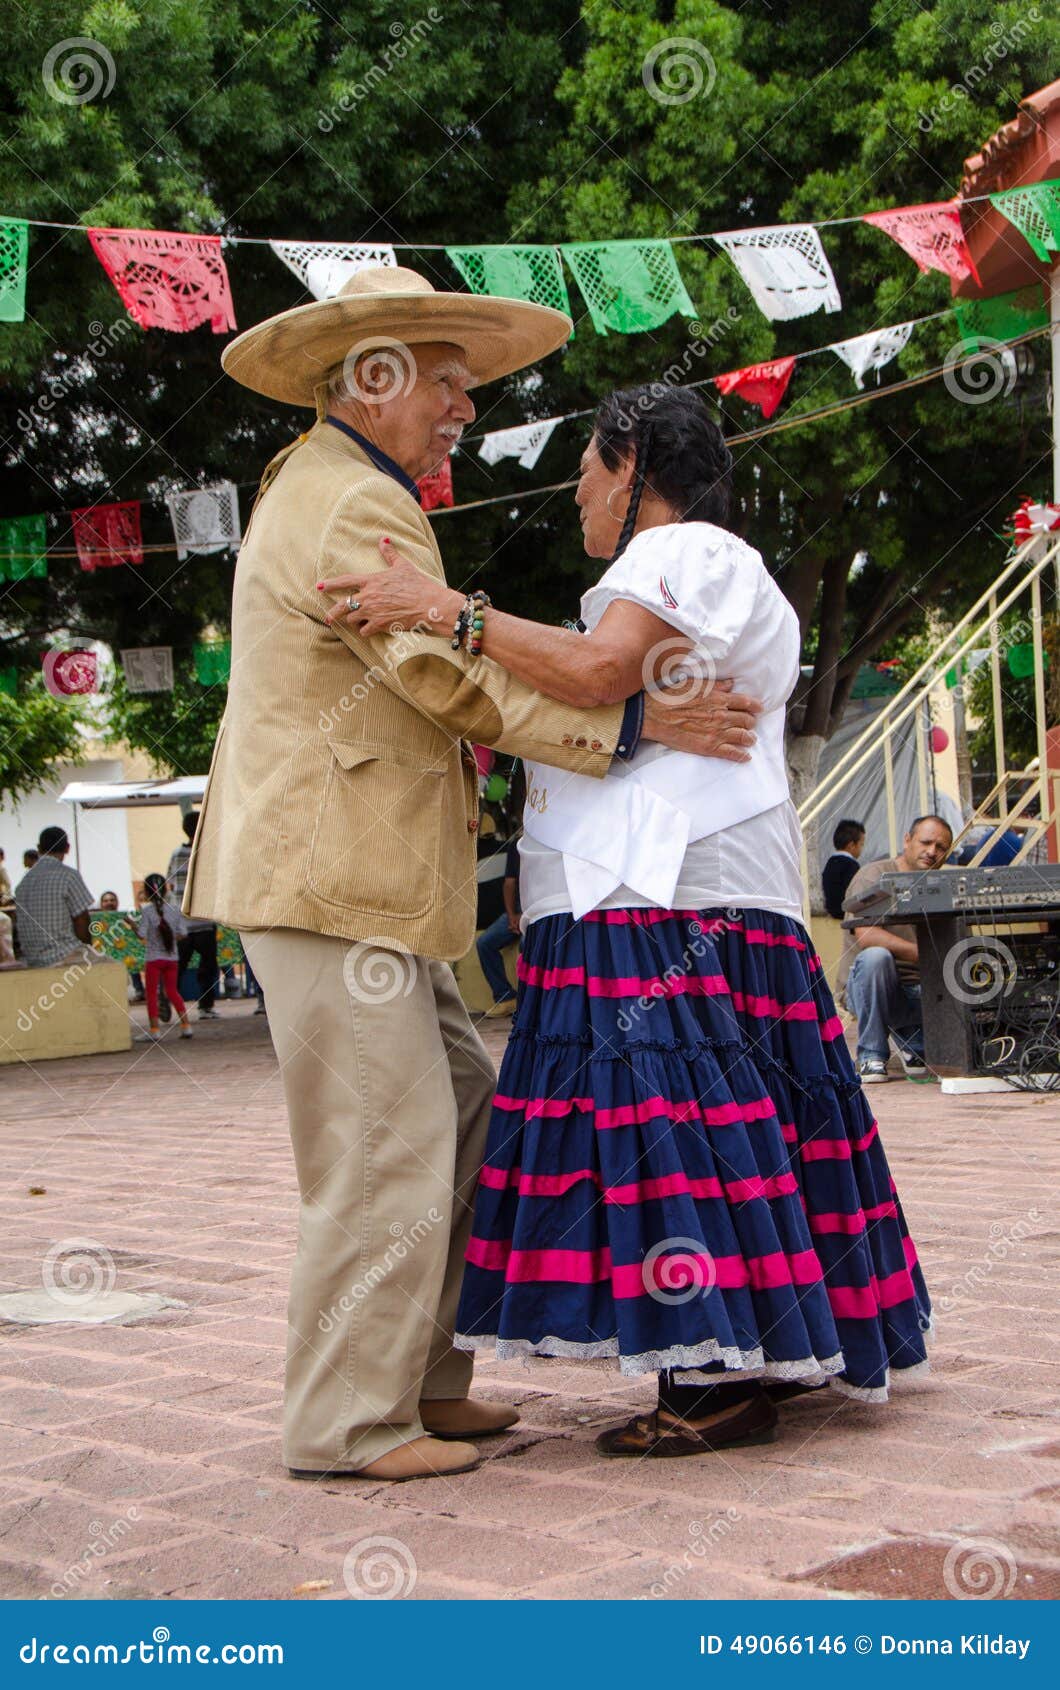 Mexican Couple Pictures Pin By Kaitlynn On Metasalv Cute Couples Goals Prom Pictures Couples